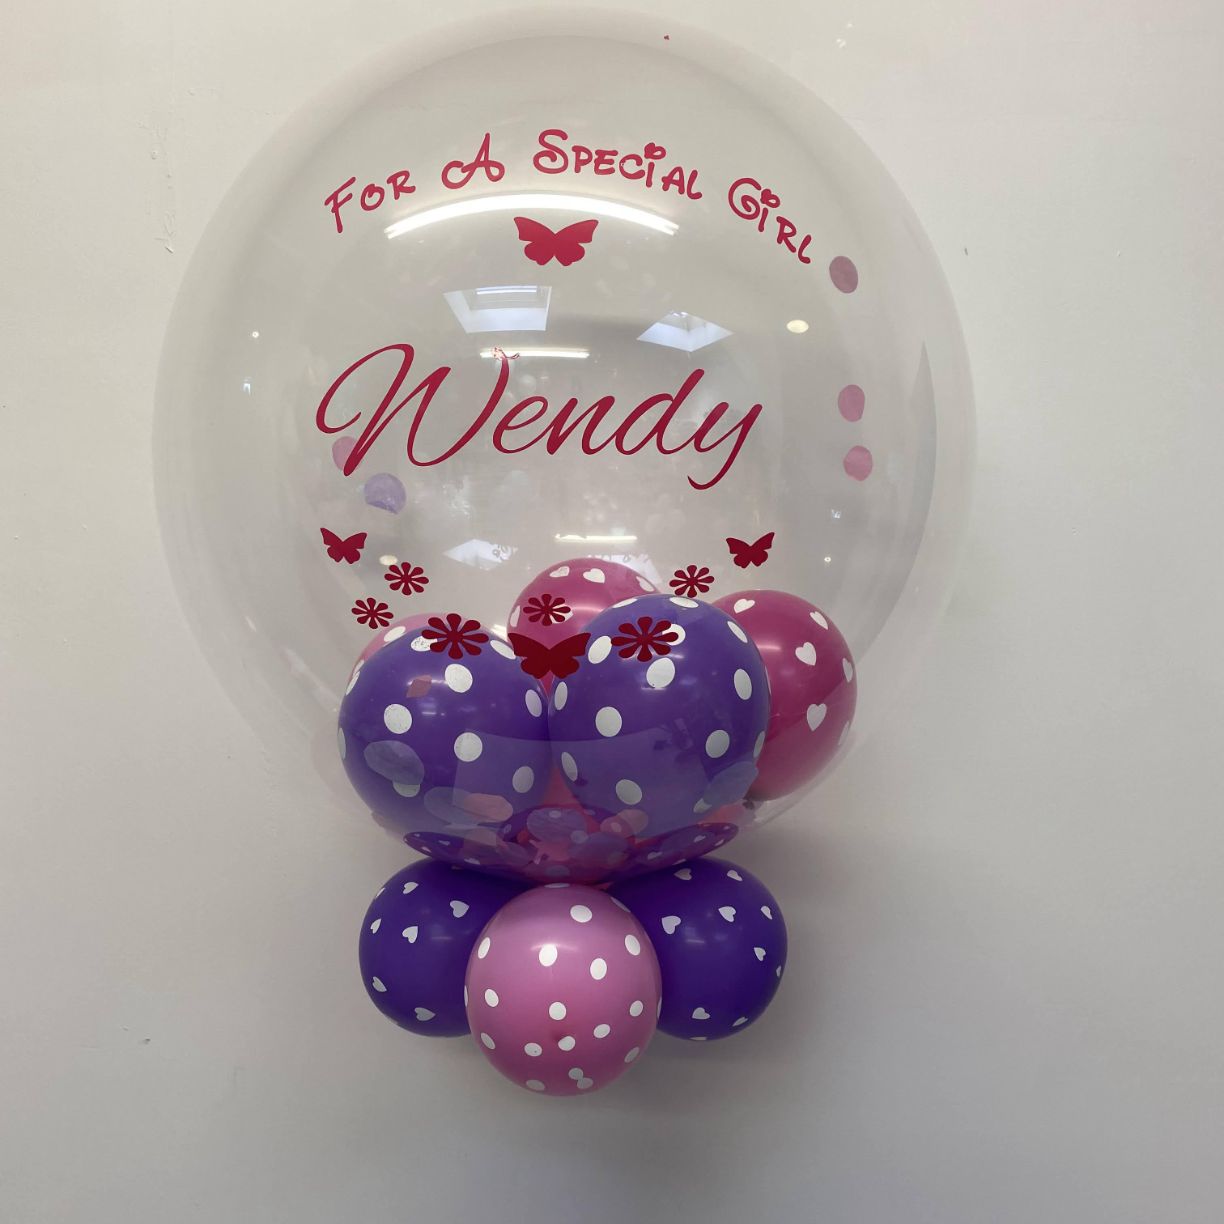 A personalised clear Bubble balloon with mini polka dot balloons inside the balloon and a pink For a Special Girl Wendy printed on the clear bubble balloon